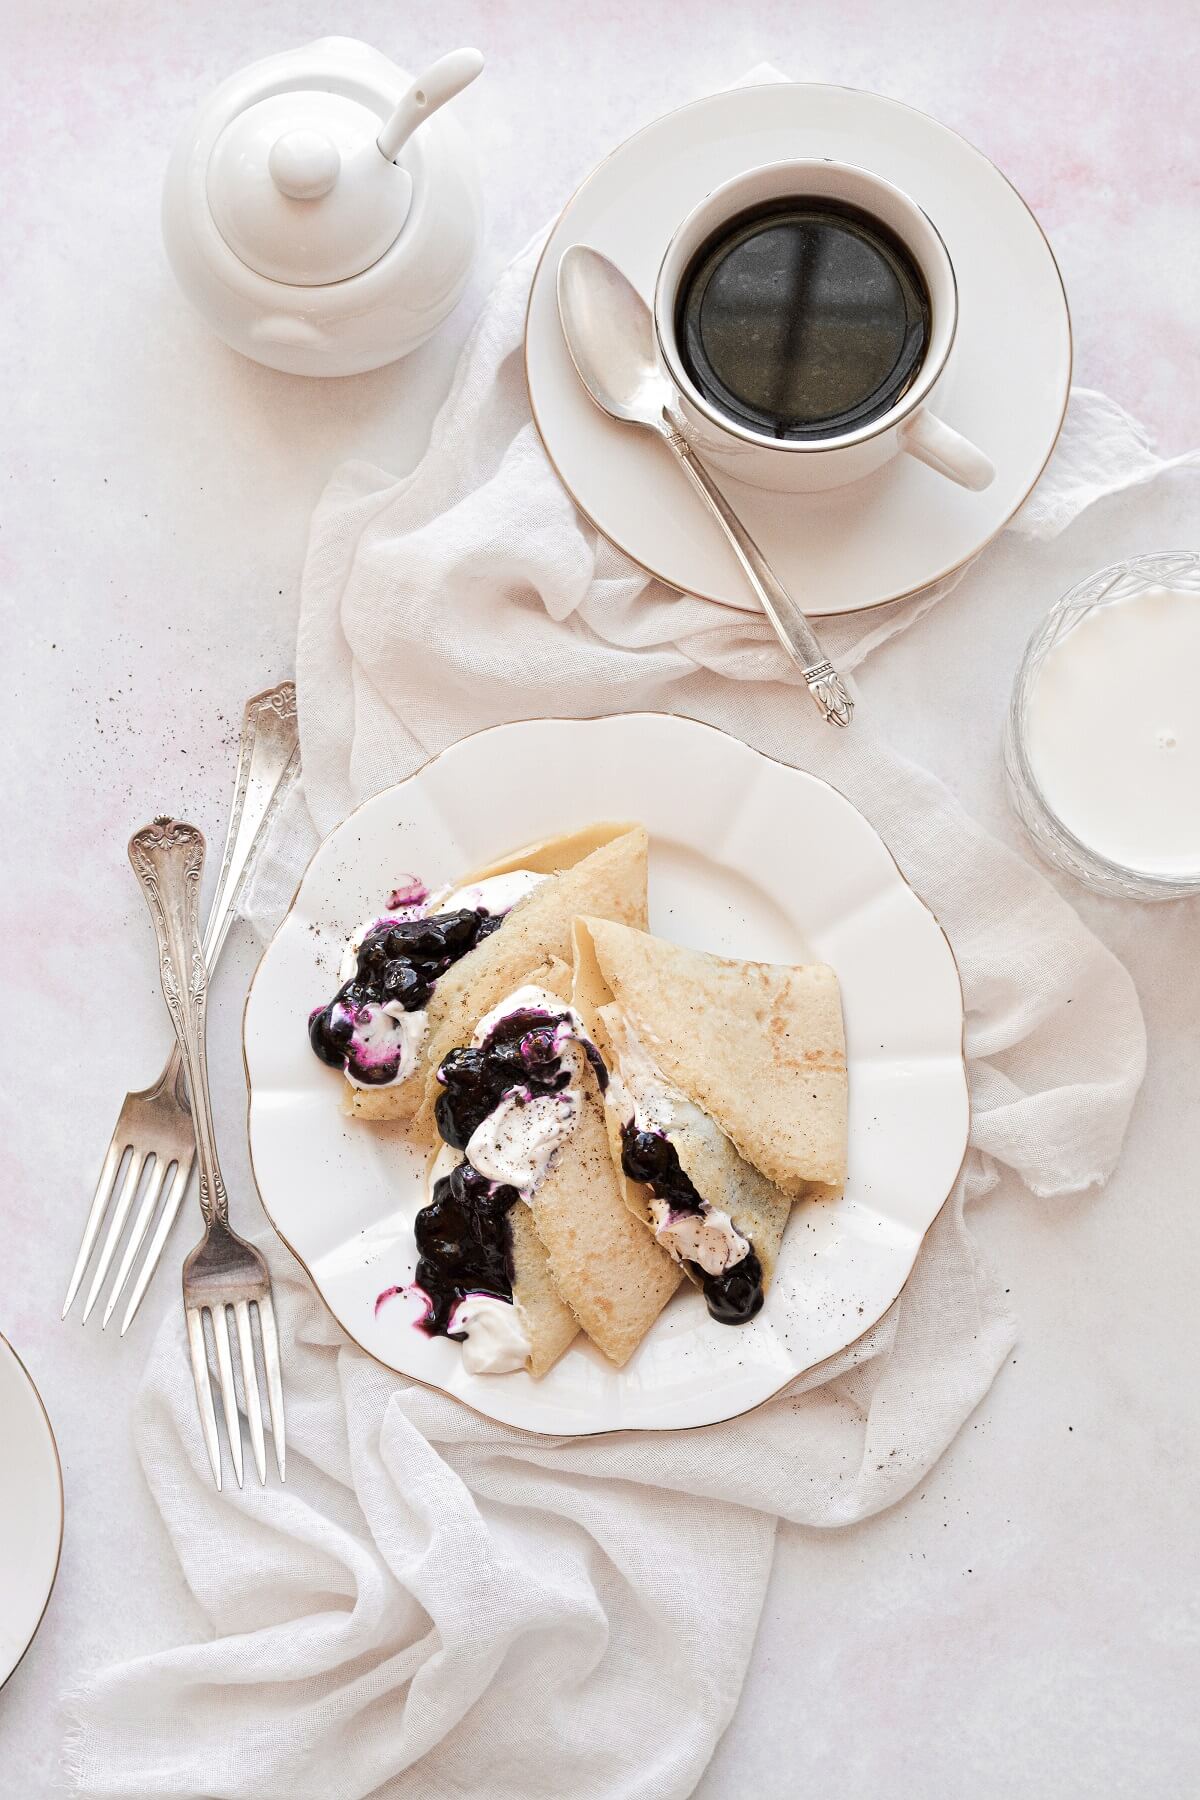 Crepes filled with whipped cream cheese and blueberry compote.